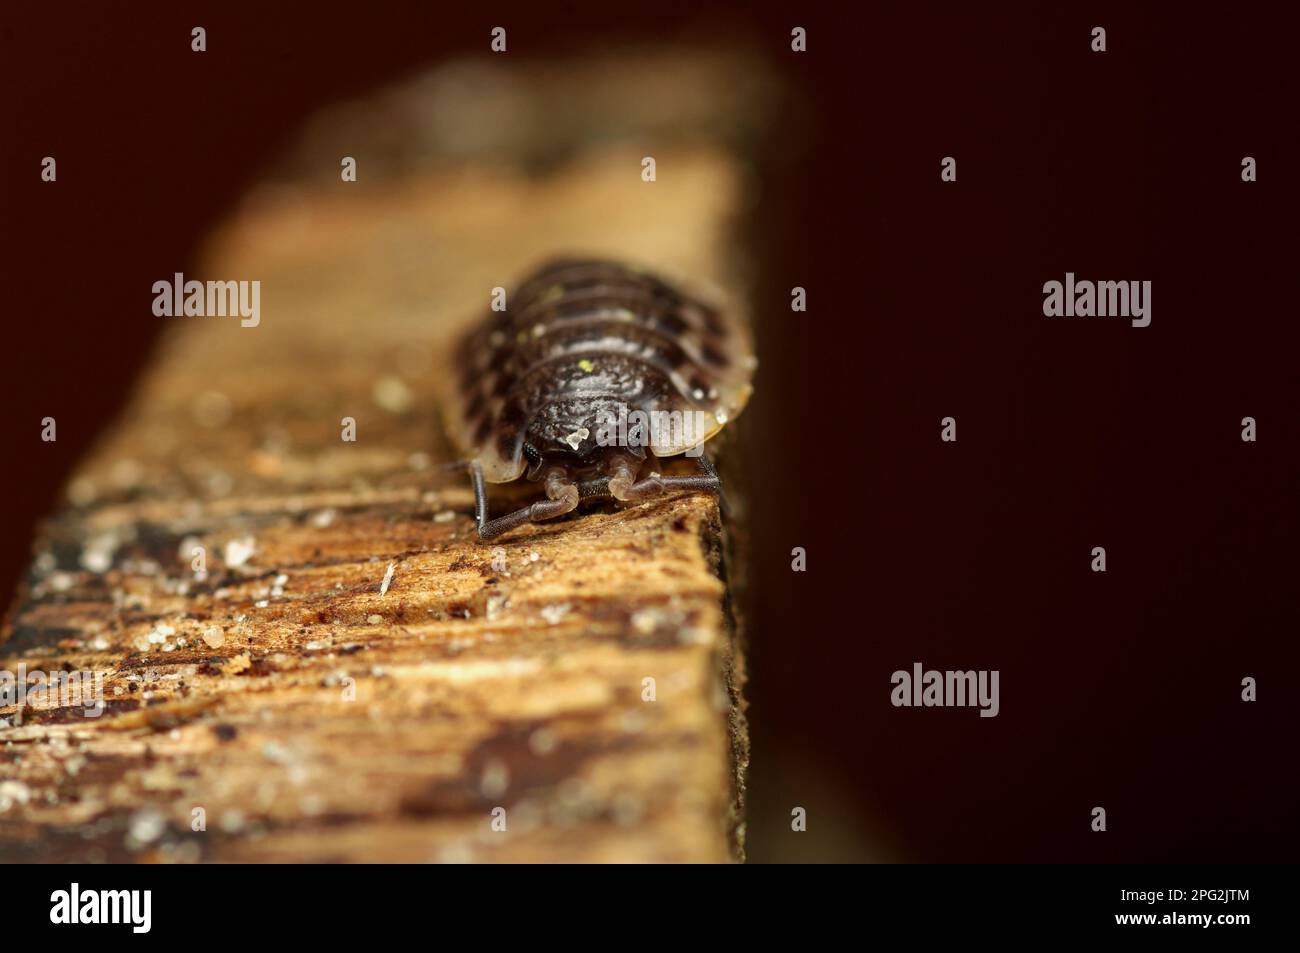 Common Woodlouse (Oniscus asellus) on a piece of wood, facing the camera, Macrophotography Arthropods, Isopods,  Mauerassel, Assel Stock Photo